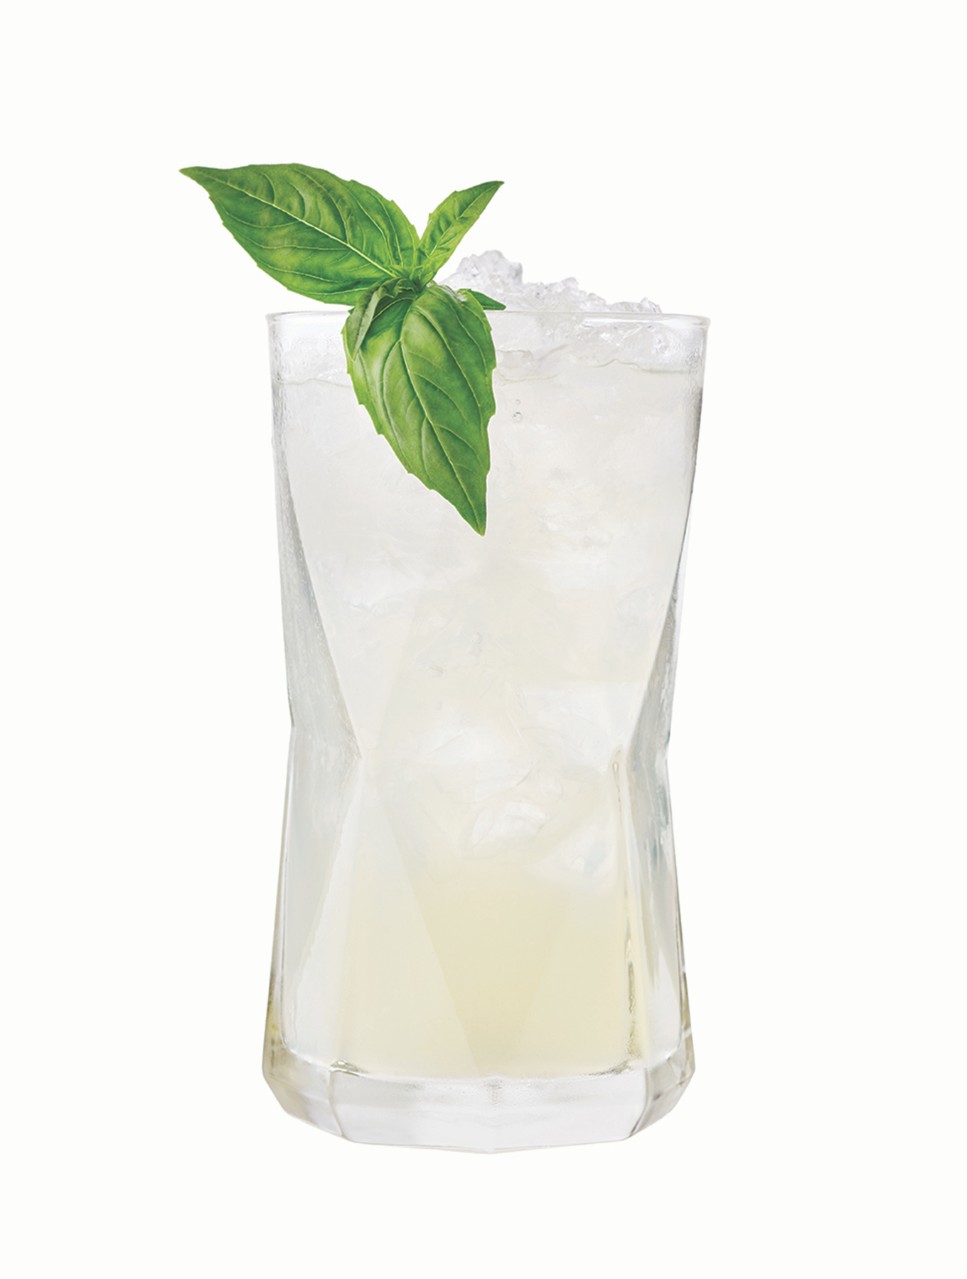 Coco-Basil Cocktail